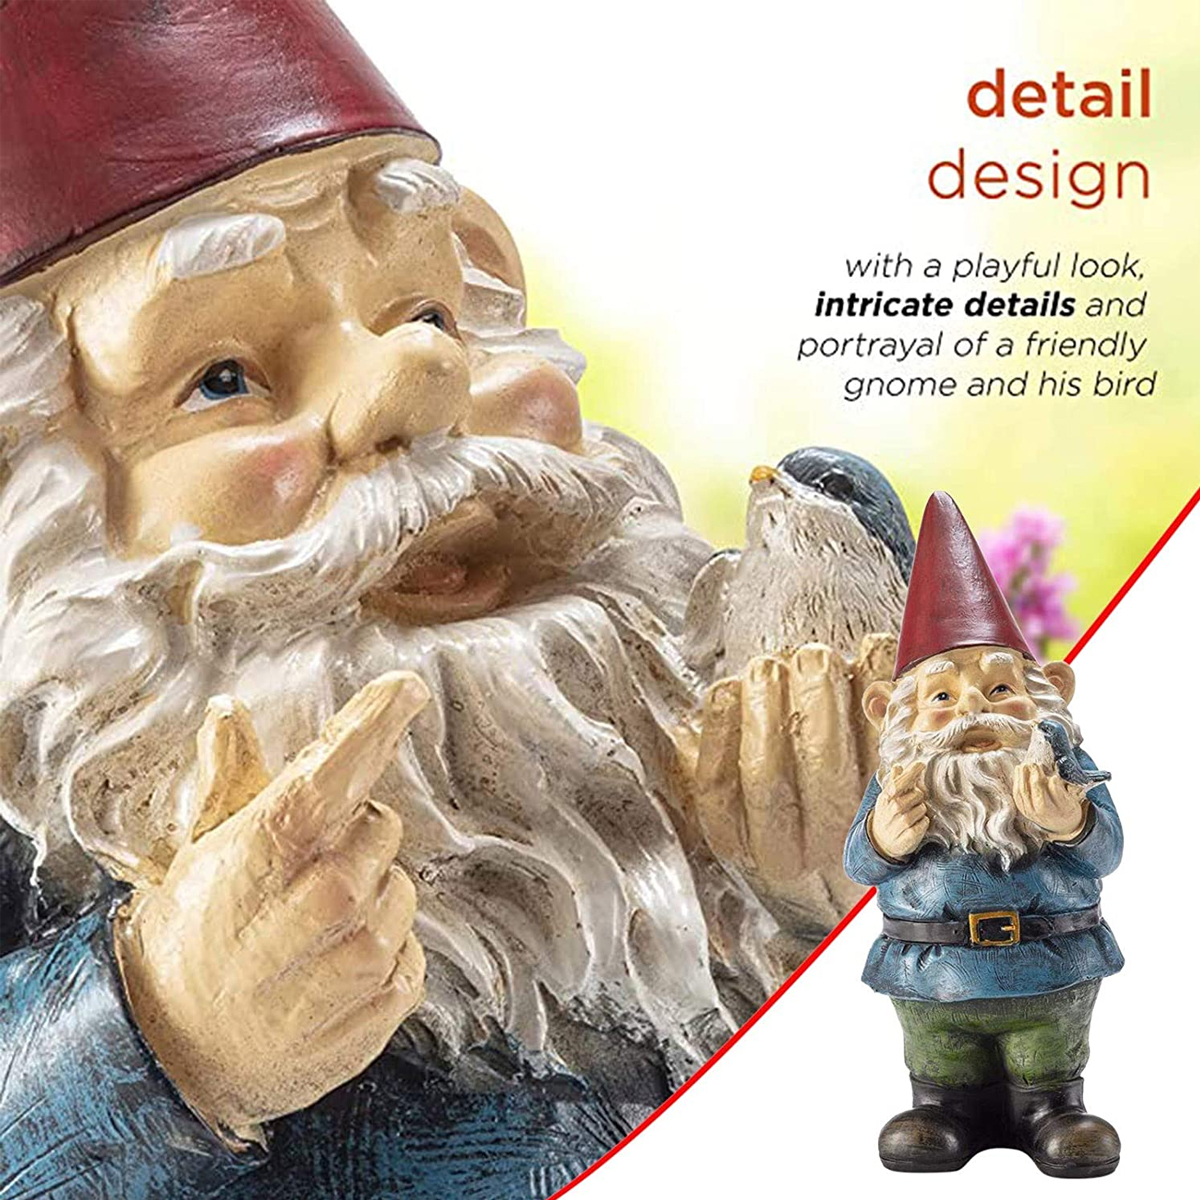 Resin-Funny-Naughty-Garden-Gnome-for-Lawn-Indoor-or-Outdoor-Decorations-1780900-4